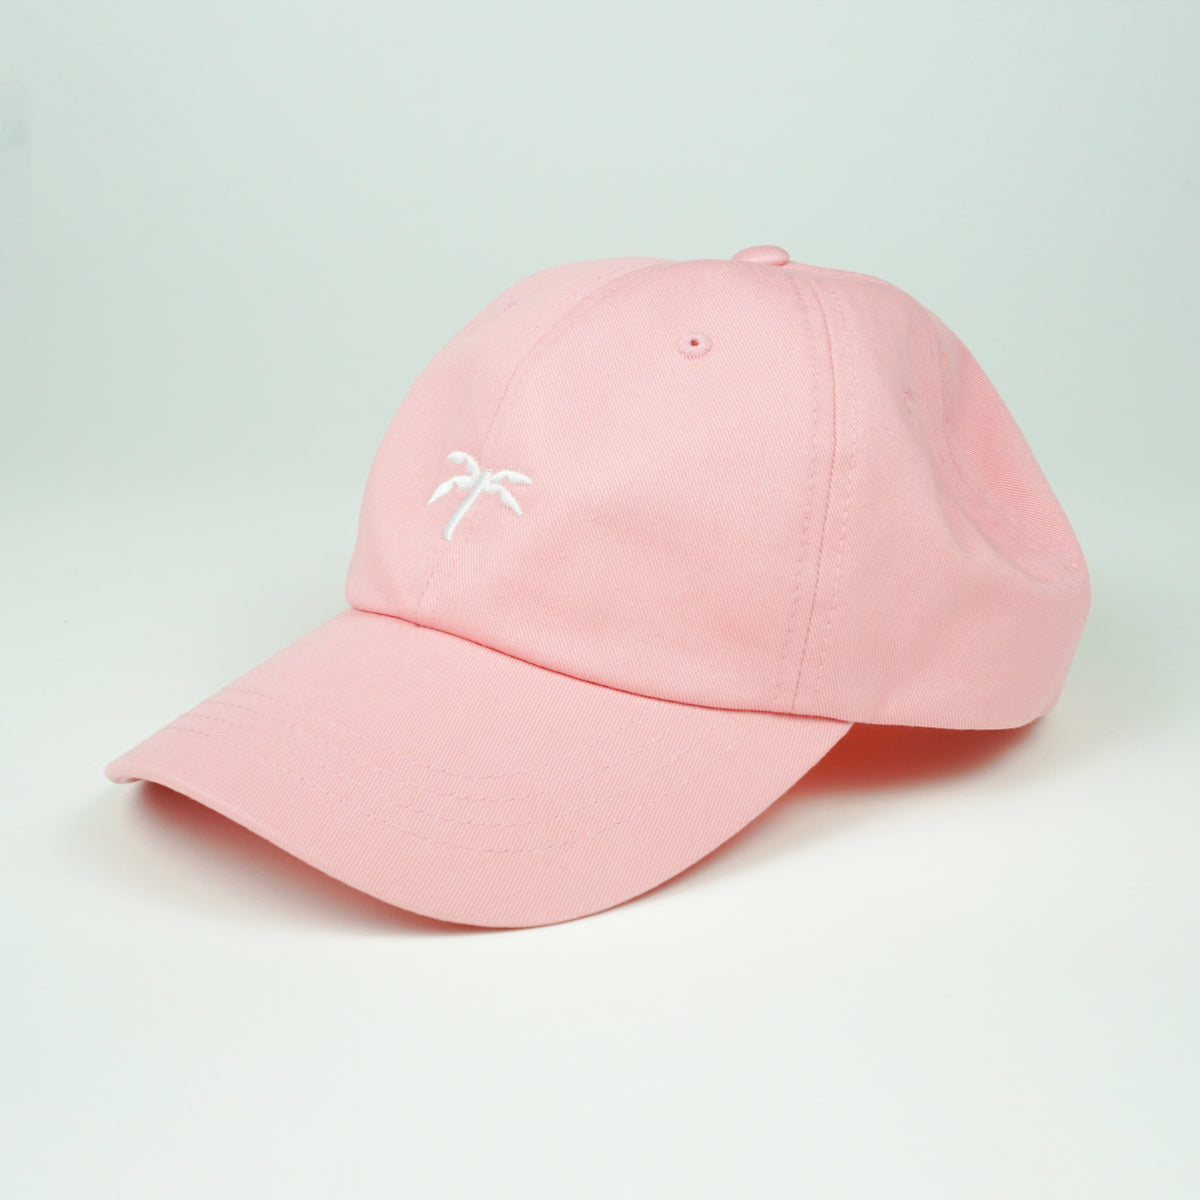 Dad Hats - Trapical